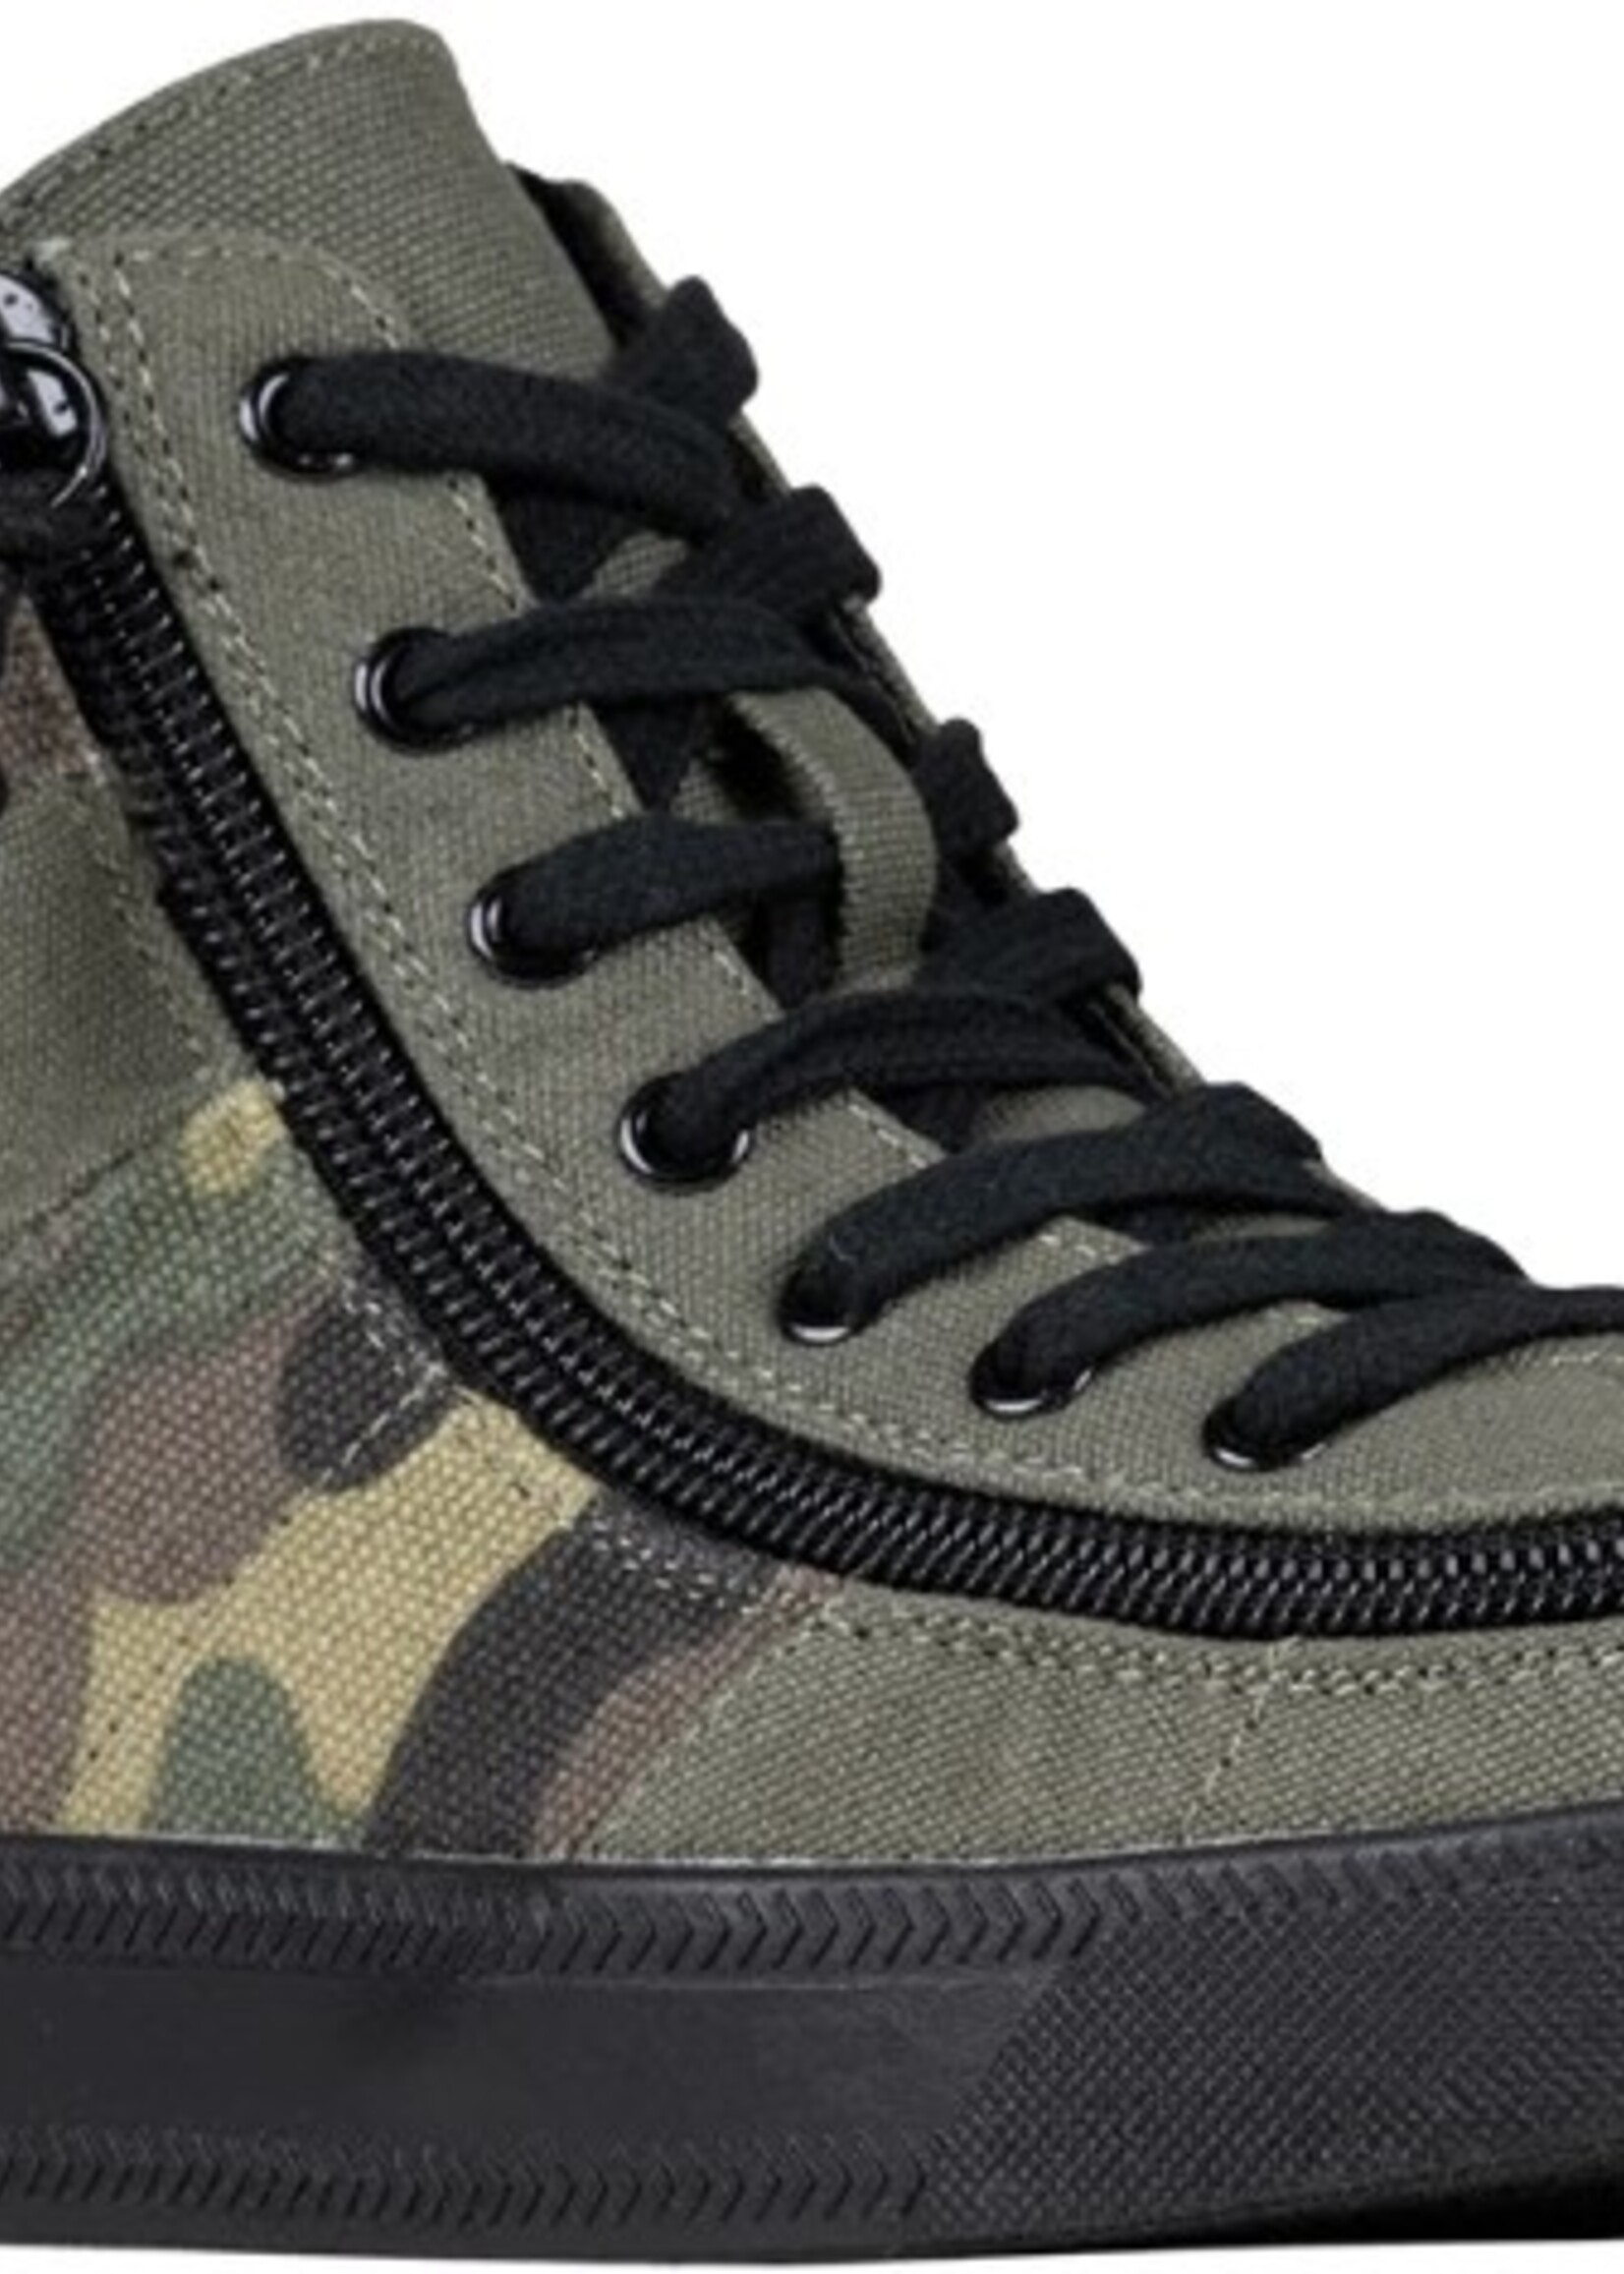 Billy Billy Classic Lace High Olive Camo 7W